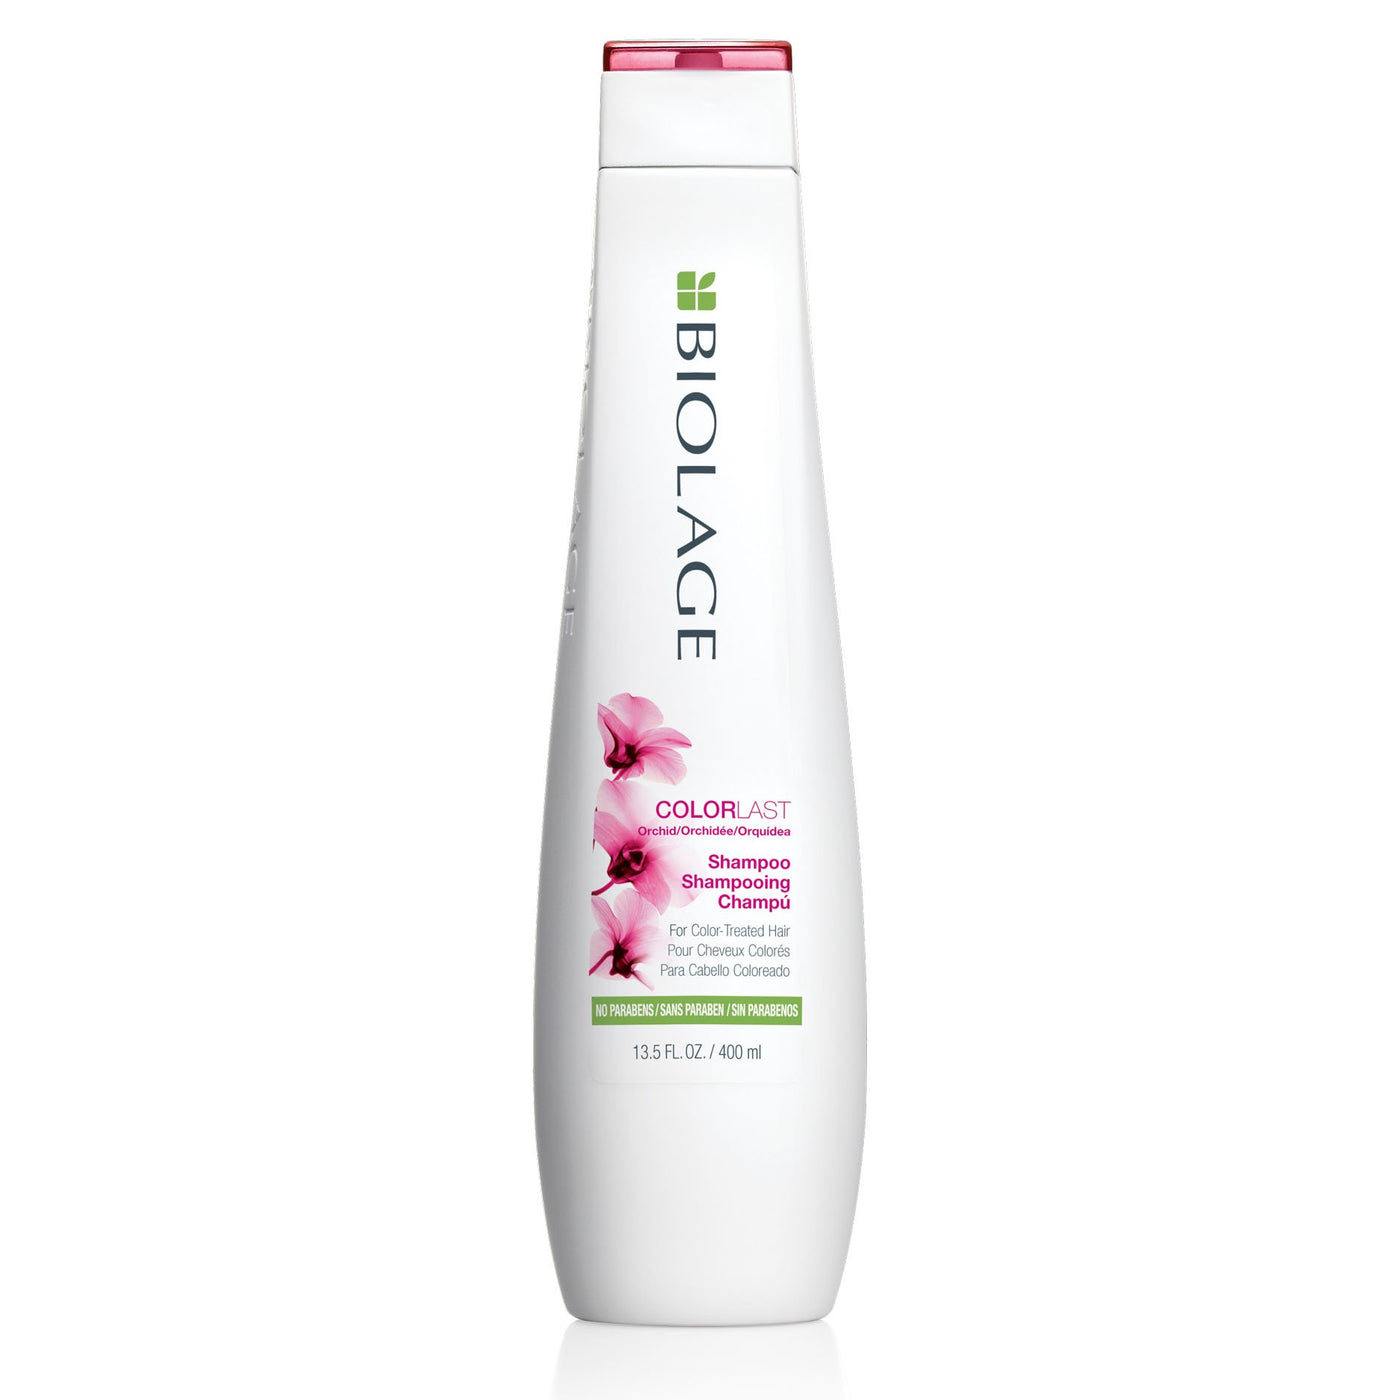 ColorLast Shampoo gently cleanses without stripping or drying